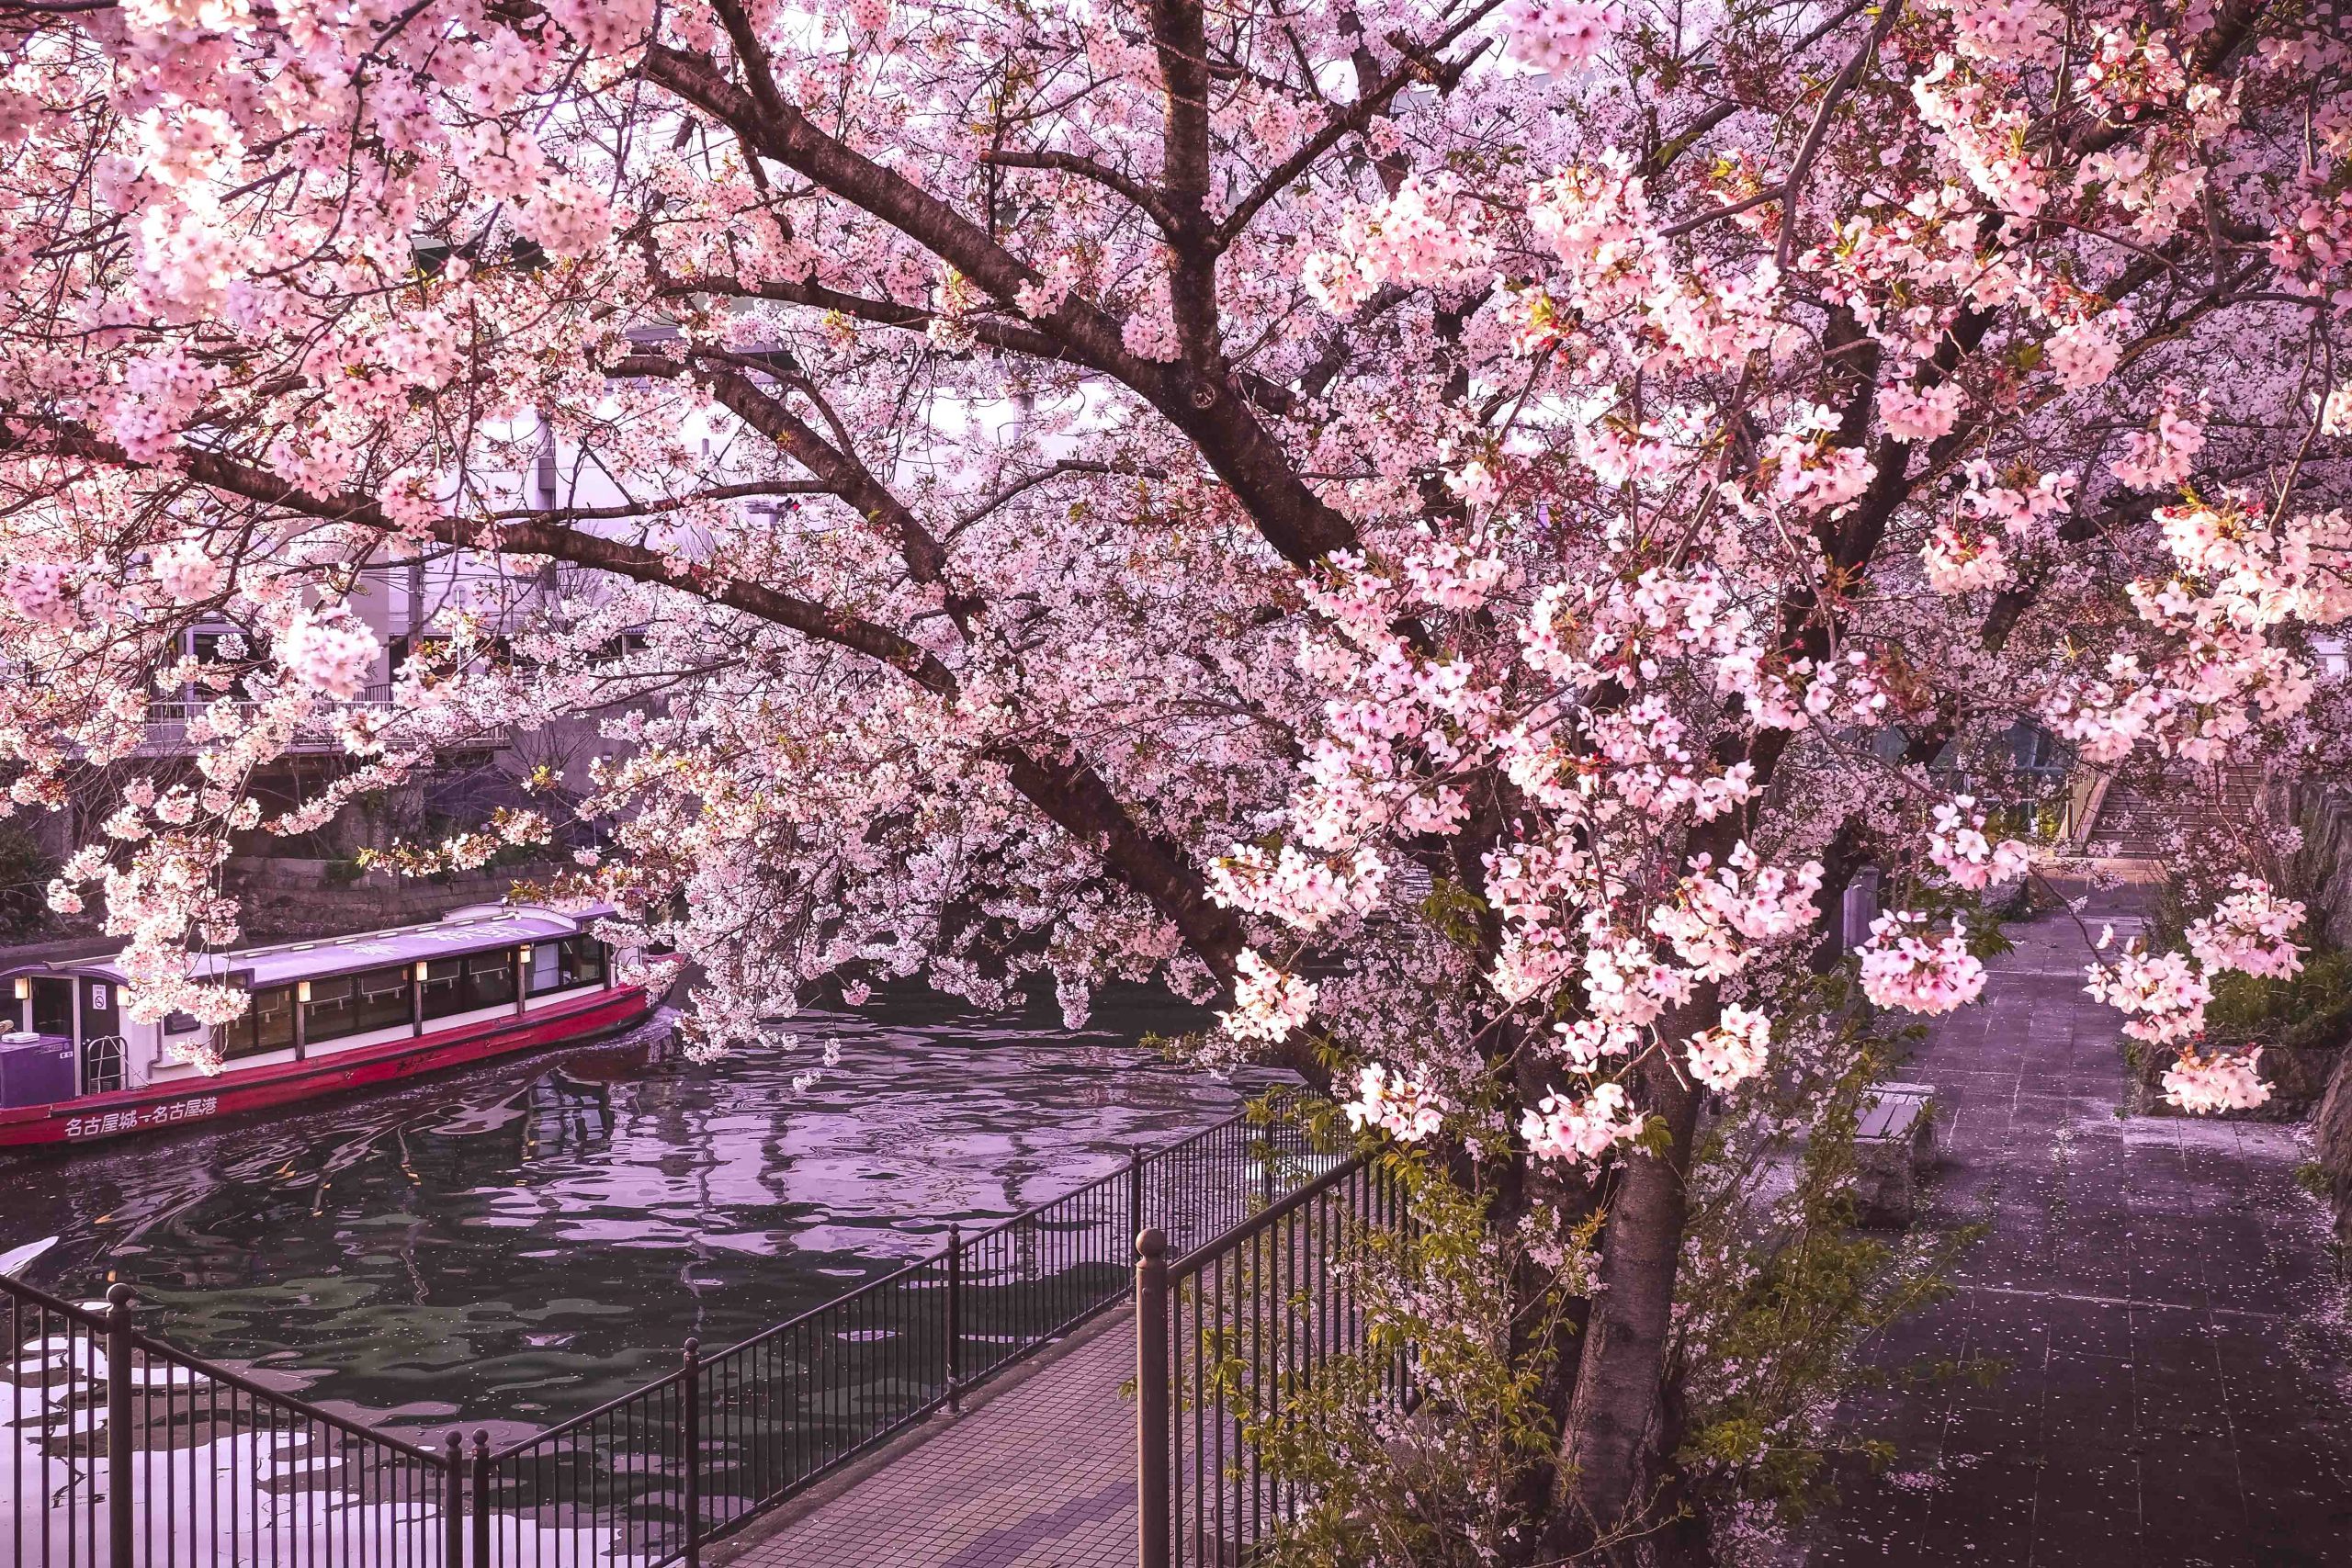 Stopping for a boat ride under the cherry blossoms during a Japan itinerary